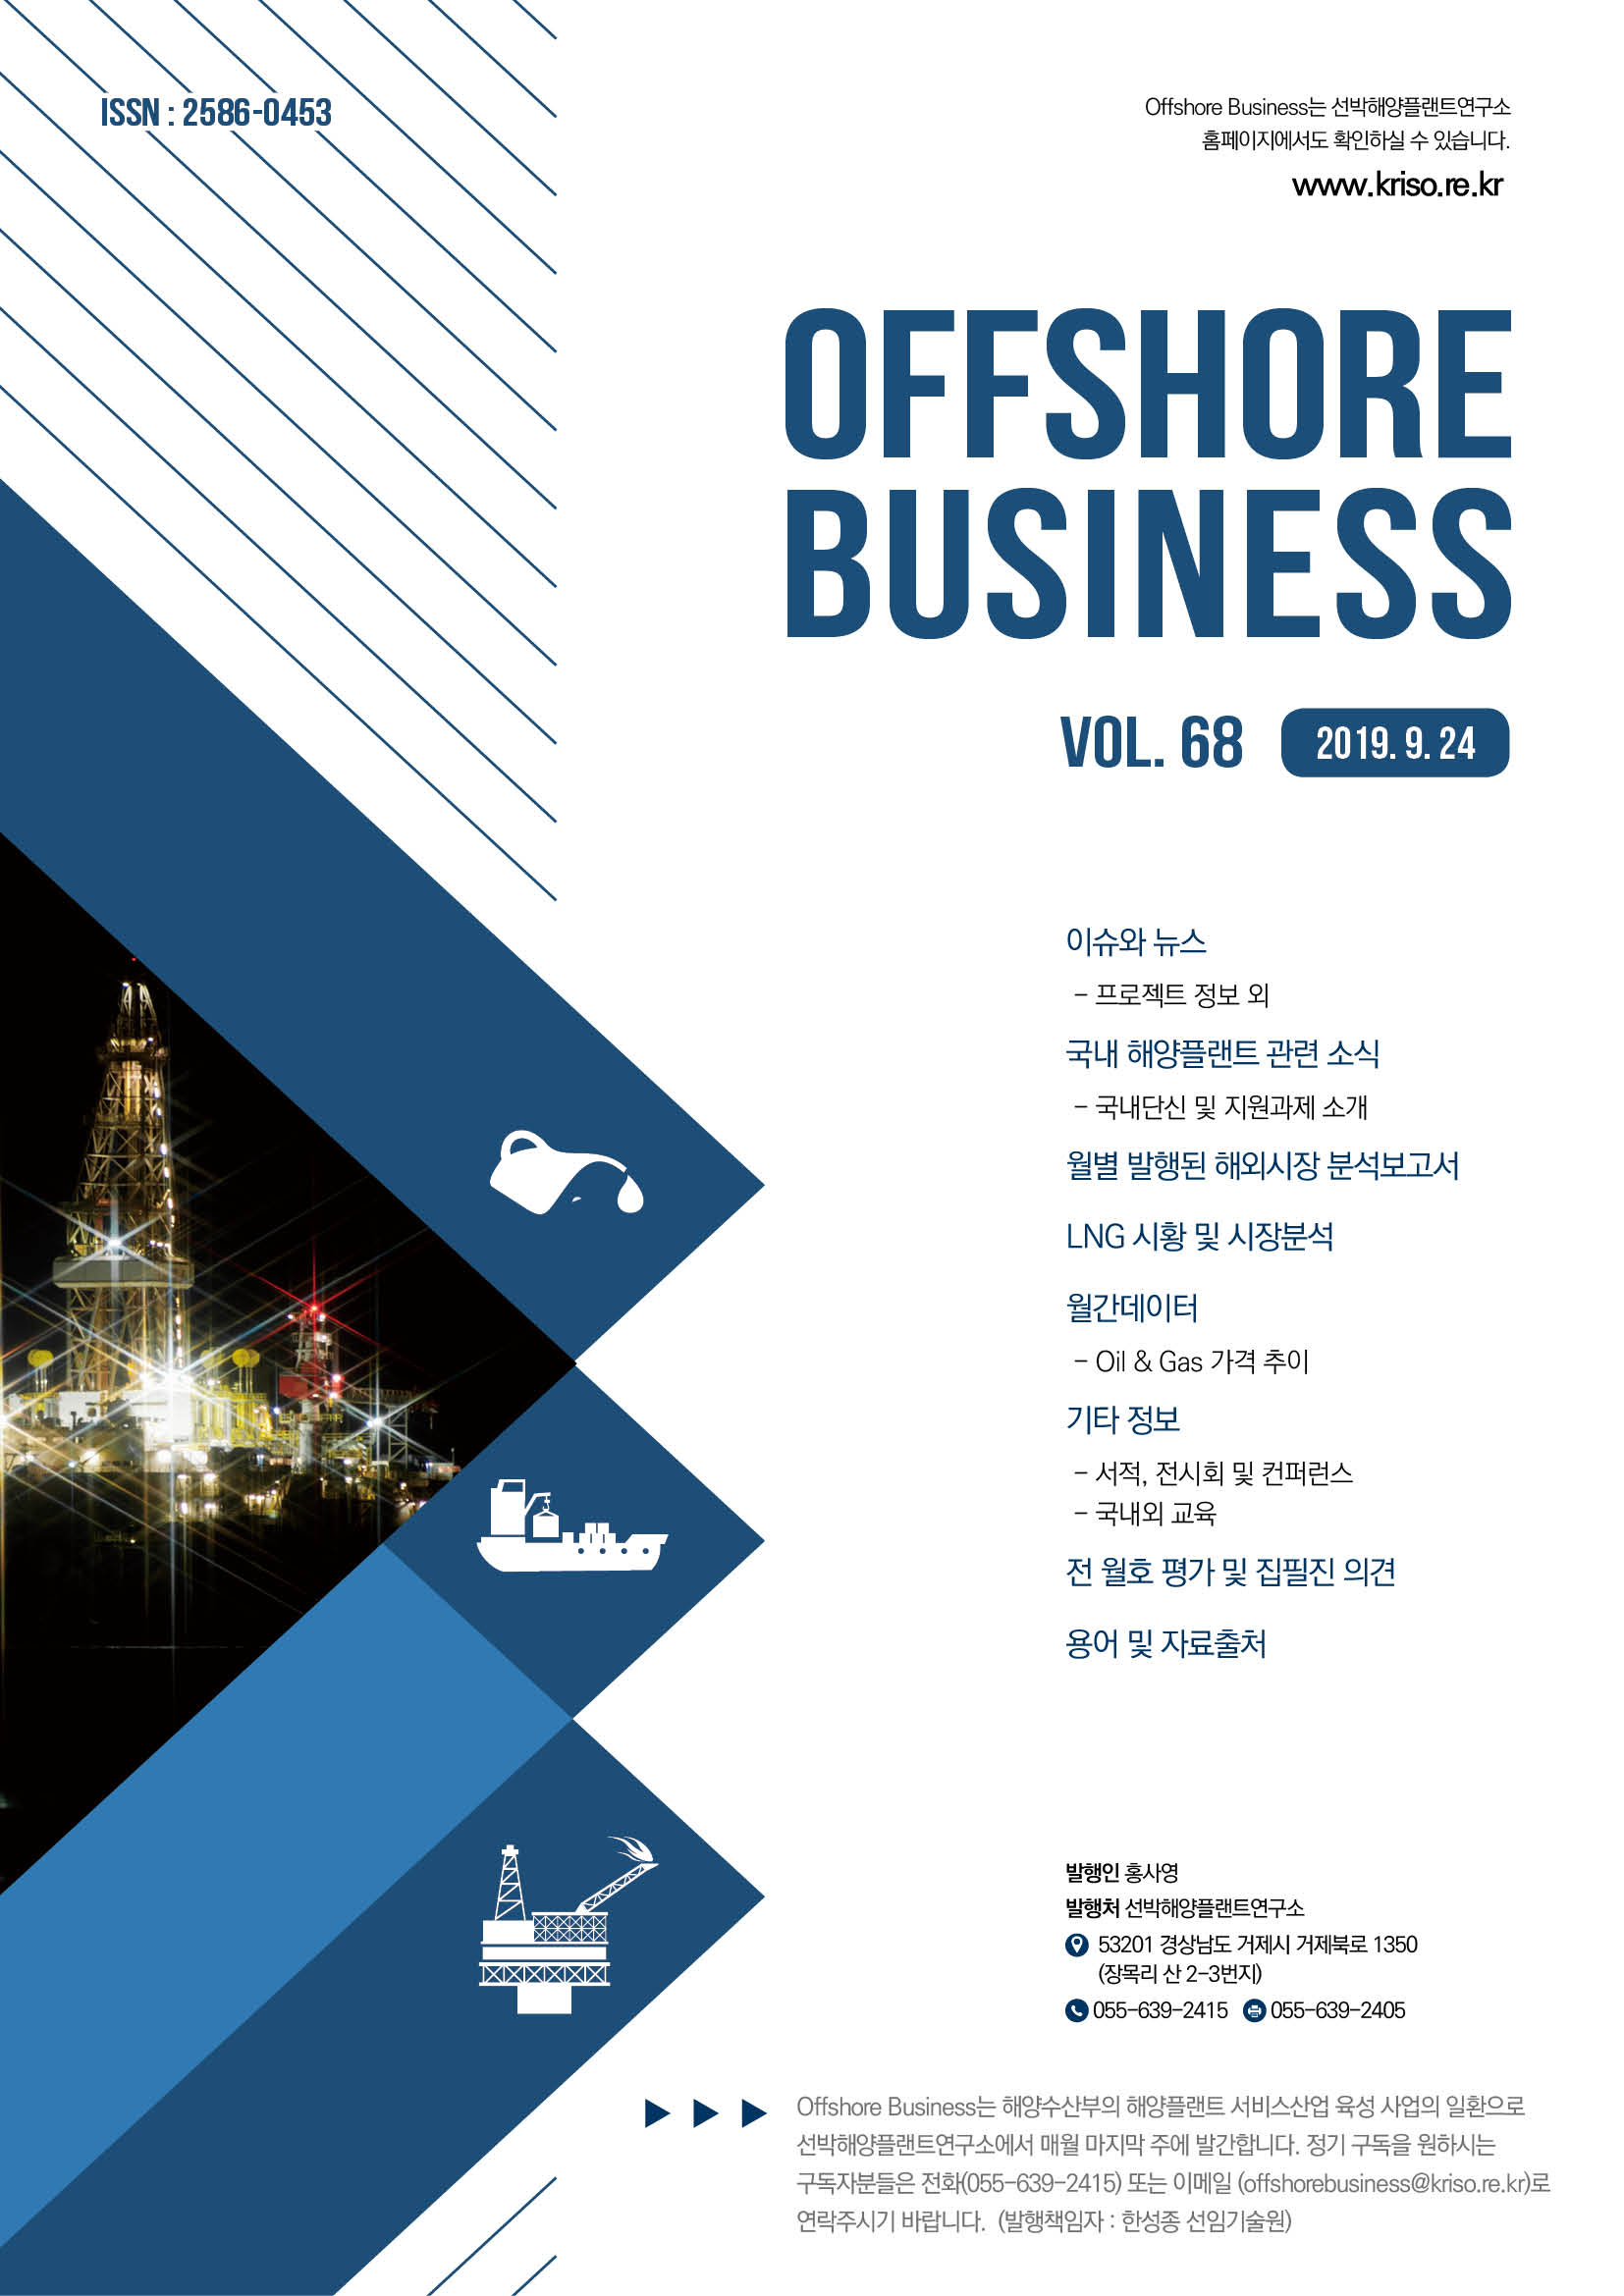 Offshore Business 68호